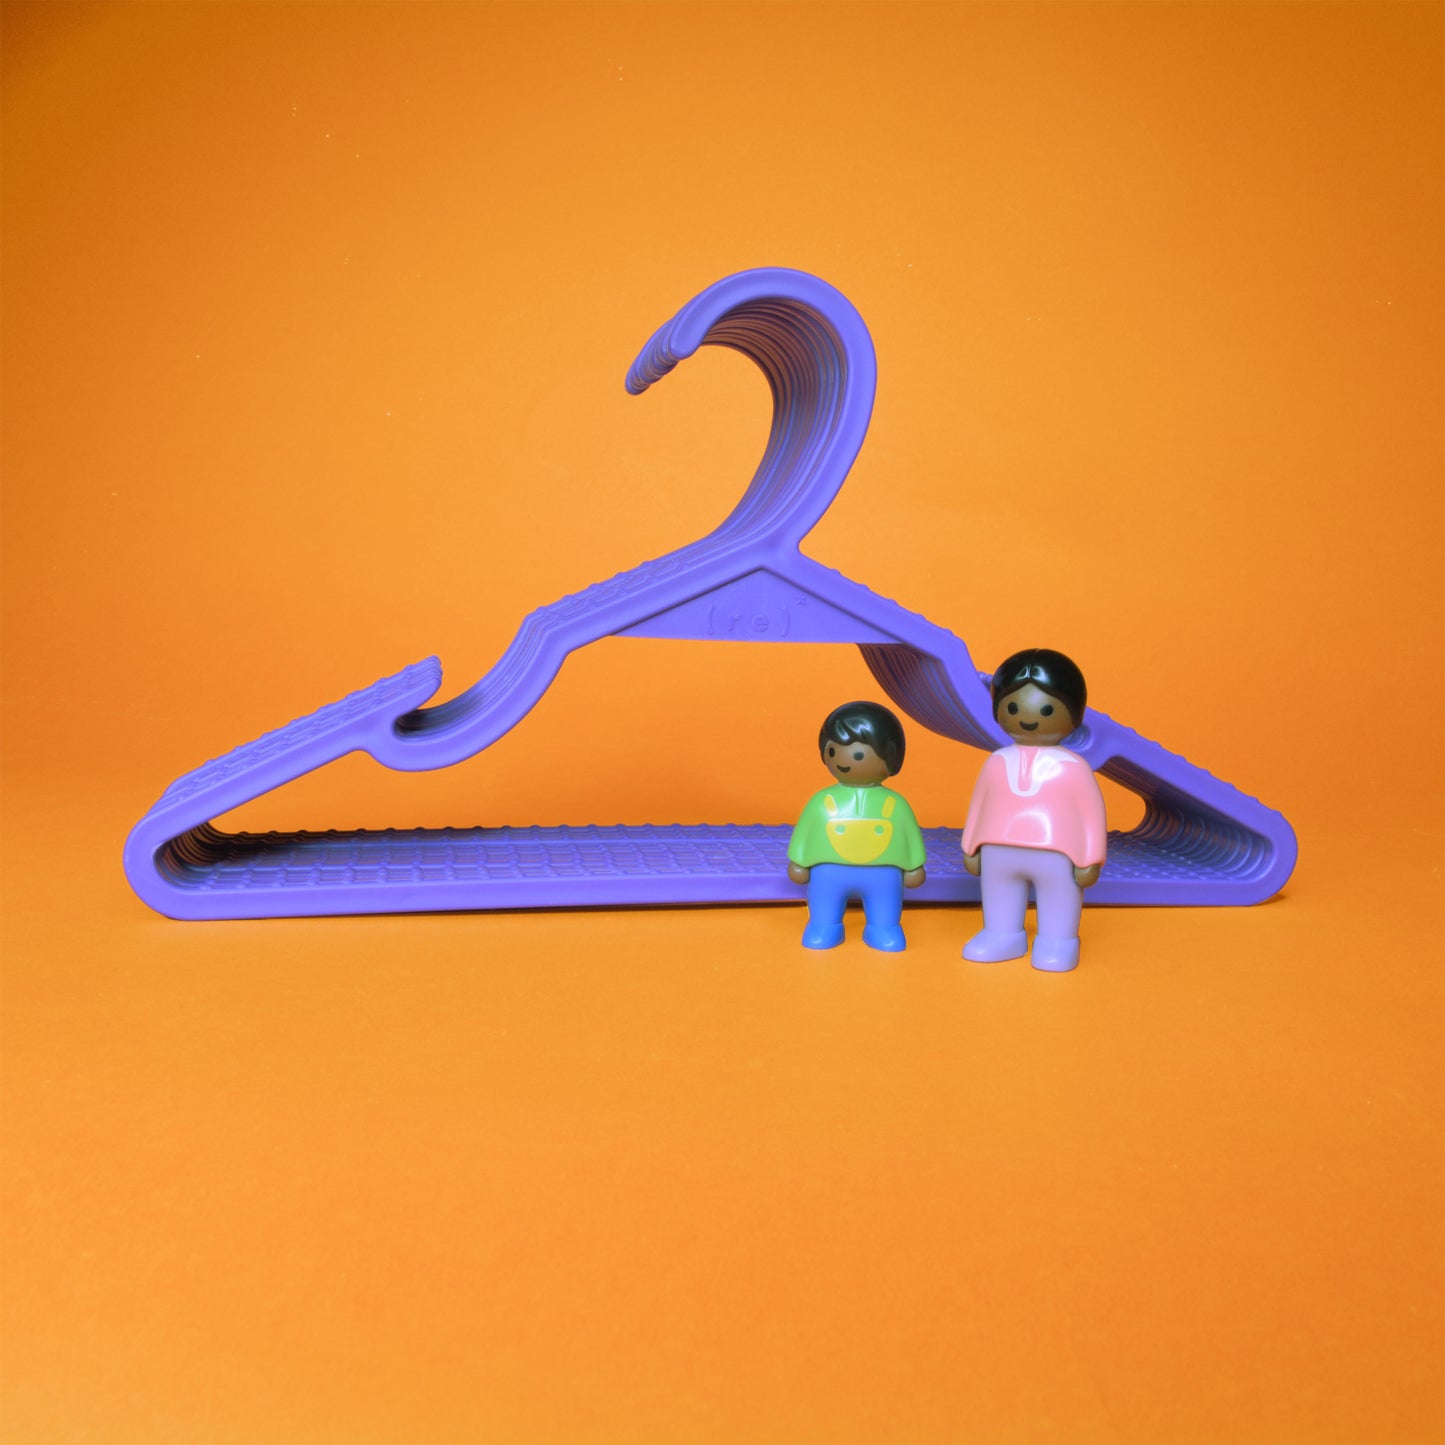 A set of purple kids hangers and two little toy figurines of a mother and child placed in front of the set